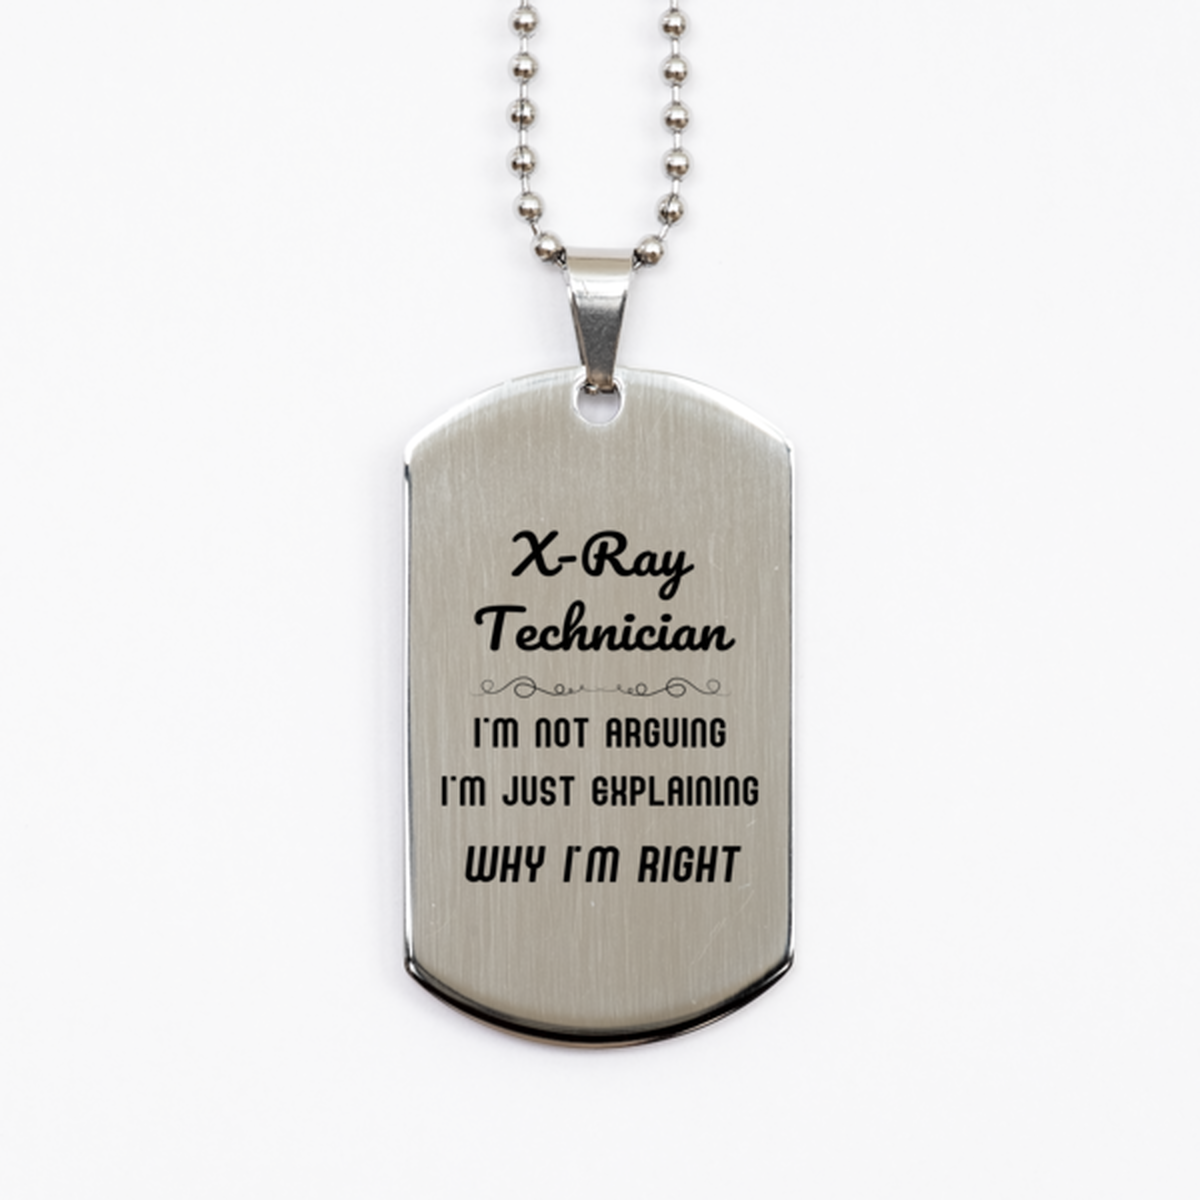 X-Ray Technician I'm not Arguing. I'm Just Explaining Why I'm RIGHT Silver Dog Tag, Funny Saying Quote X-Ray Technician Gifts For X-Ray Technician Graduation Birthday Christmas Gifts for Men Women Coworker